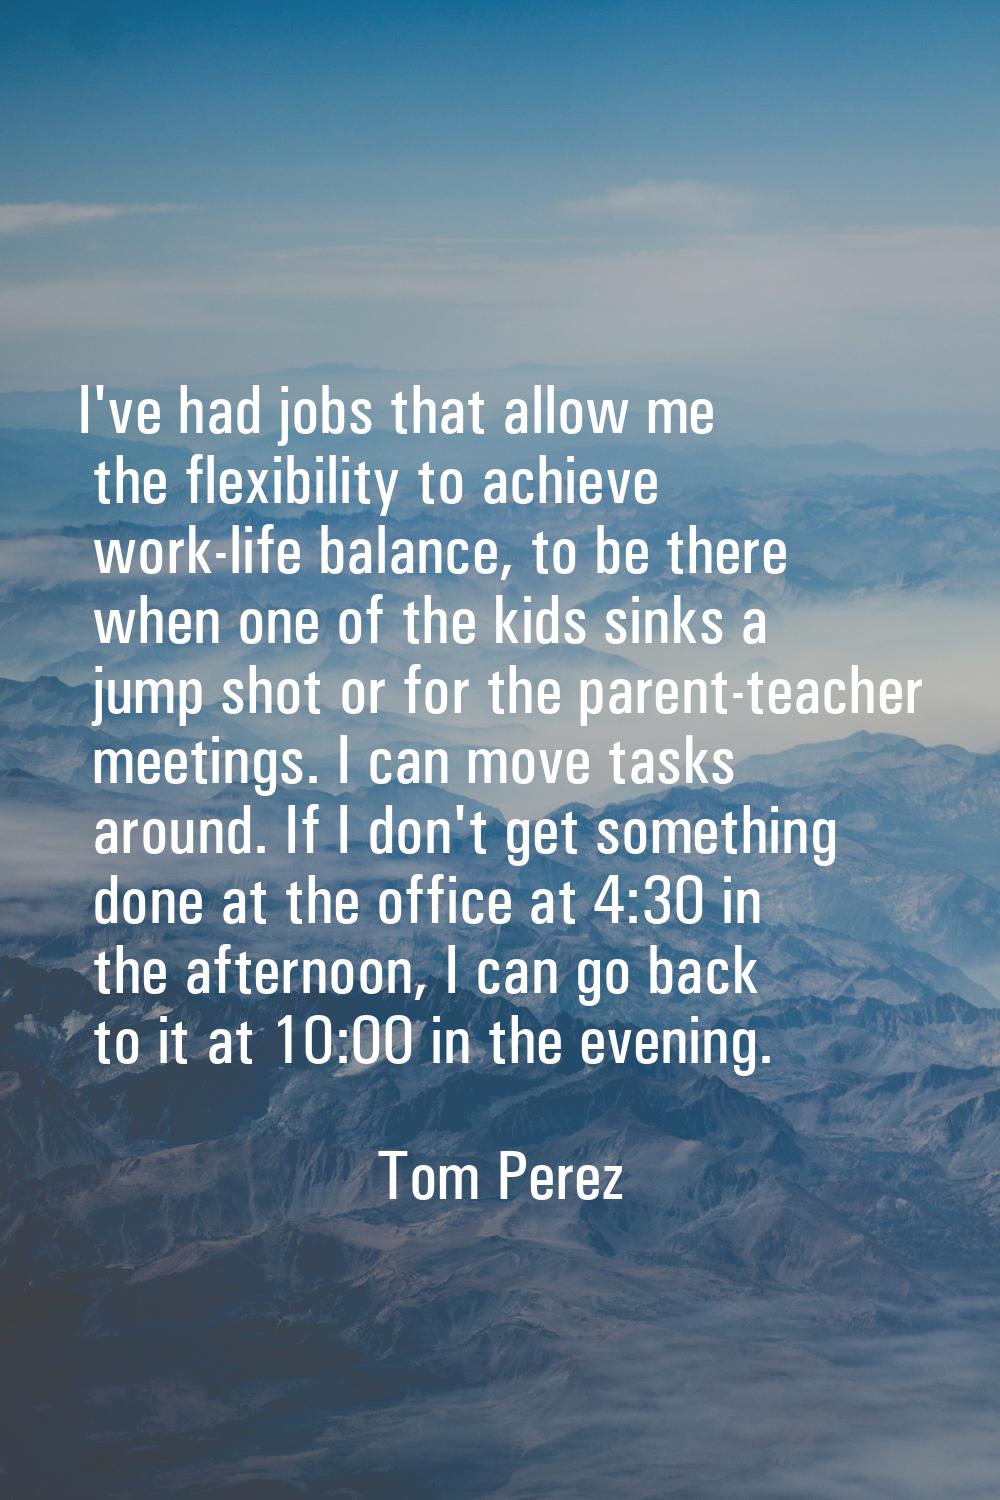 I've had jobs that allow me the flexibility to achieve work-life balance, to be there when one of t